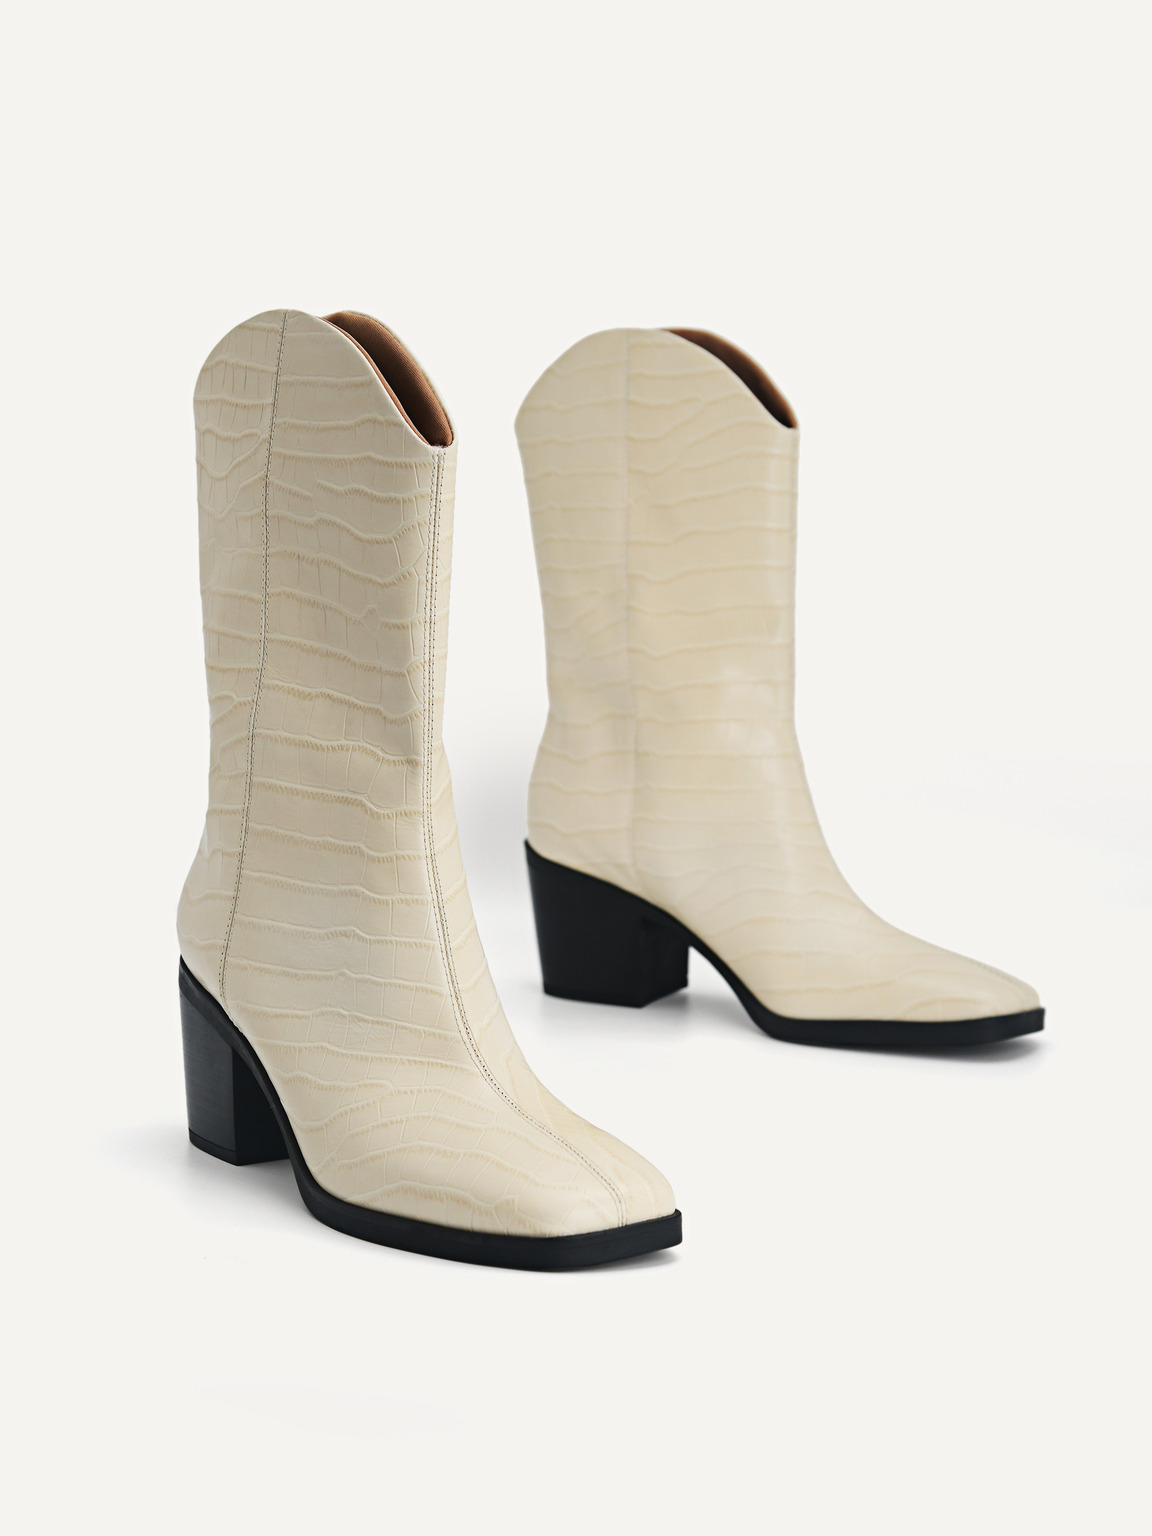 Croc-Effect Leather Ankle Boots, Light Yellow